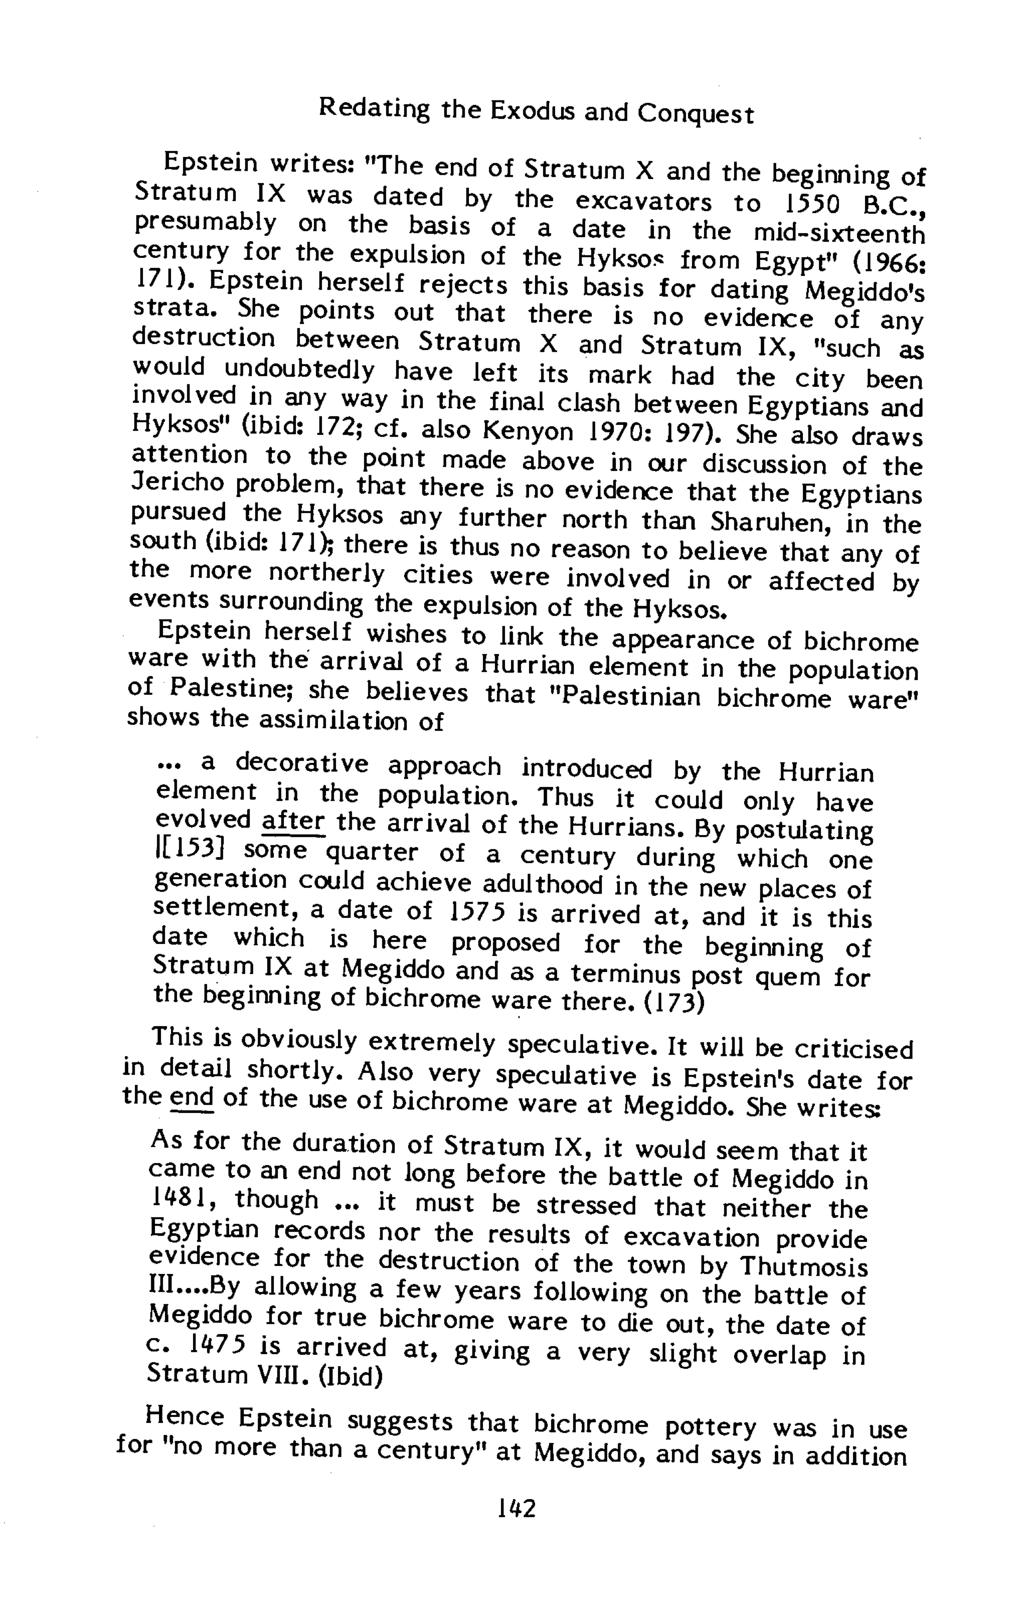 Redating the Exodus and Conquest Epstein writes: "The end of Stratum X and the beginning of Stratum IX was dated by the excavators to 1550 B.C., presumably on the basis of a date in the mid-sixteenth century for the expulsion of the Hykso~ from Egypt" ( 1966: 171).